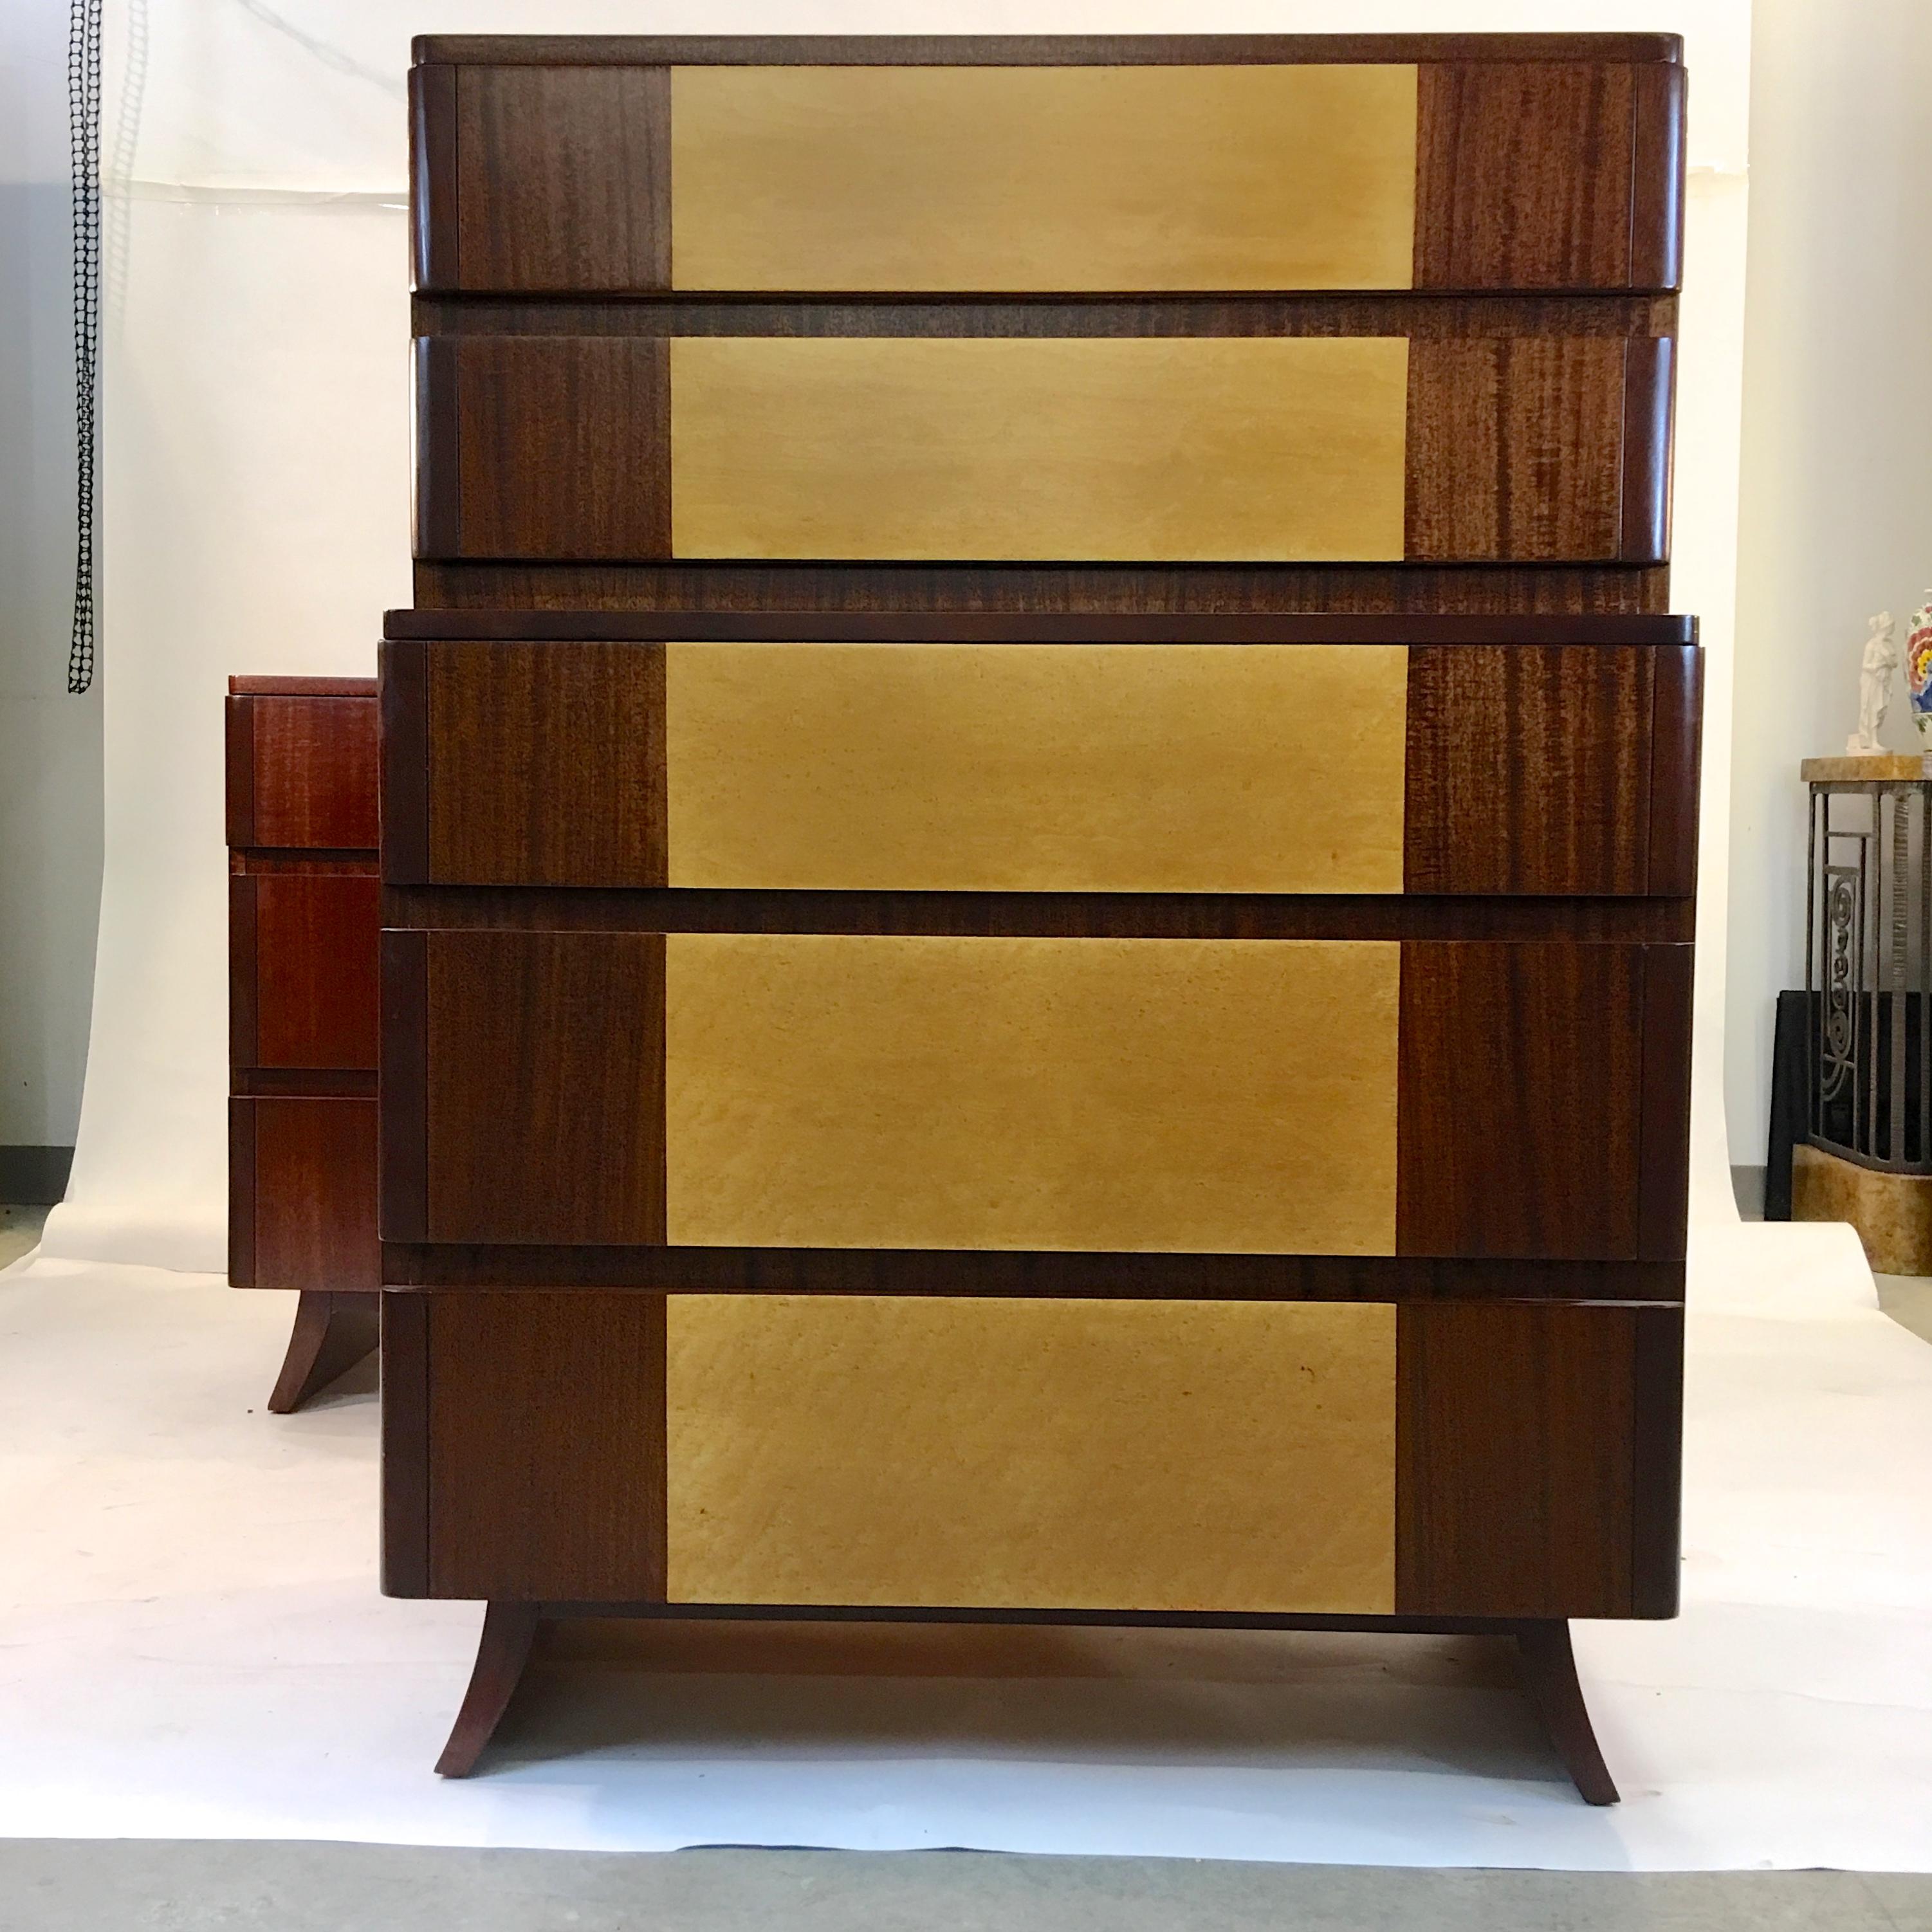 American Art Deco highboy dresser with Machine-Age lines in its tiered appearance and curved edge drawers. Produced circa 1947 by R-Way Furniture Co in the manner of Eliel Saarinen. Two tone bookmatched mahogany with exotic burl or curly maple inlay